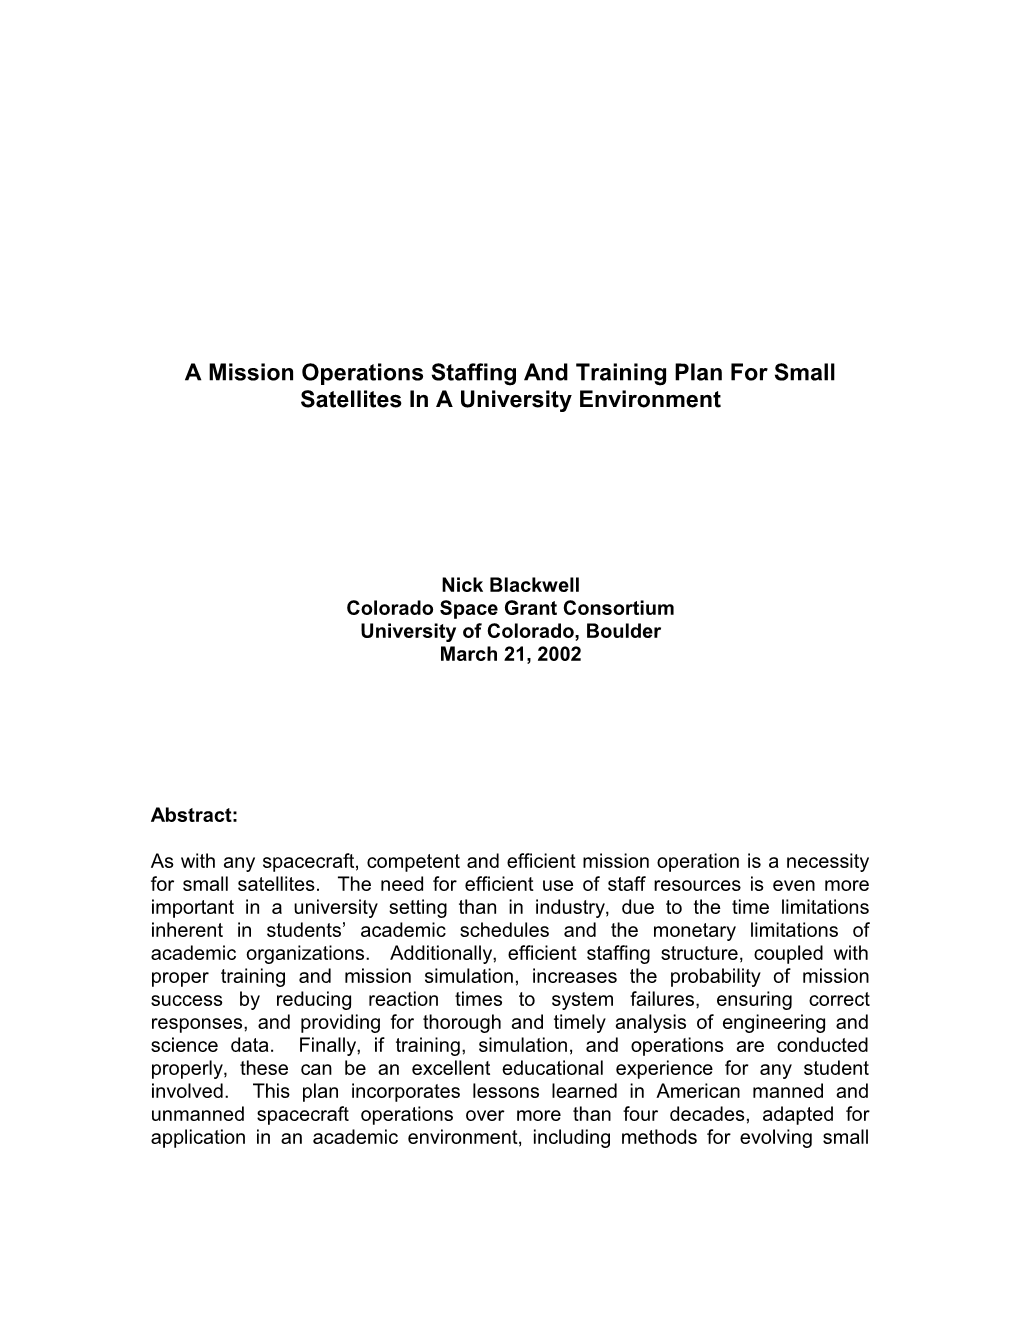 A Mission Operations Staffing and Training Plan for Small Satellites in a University Environment